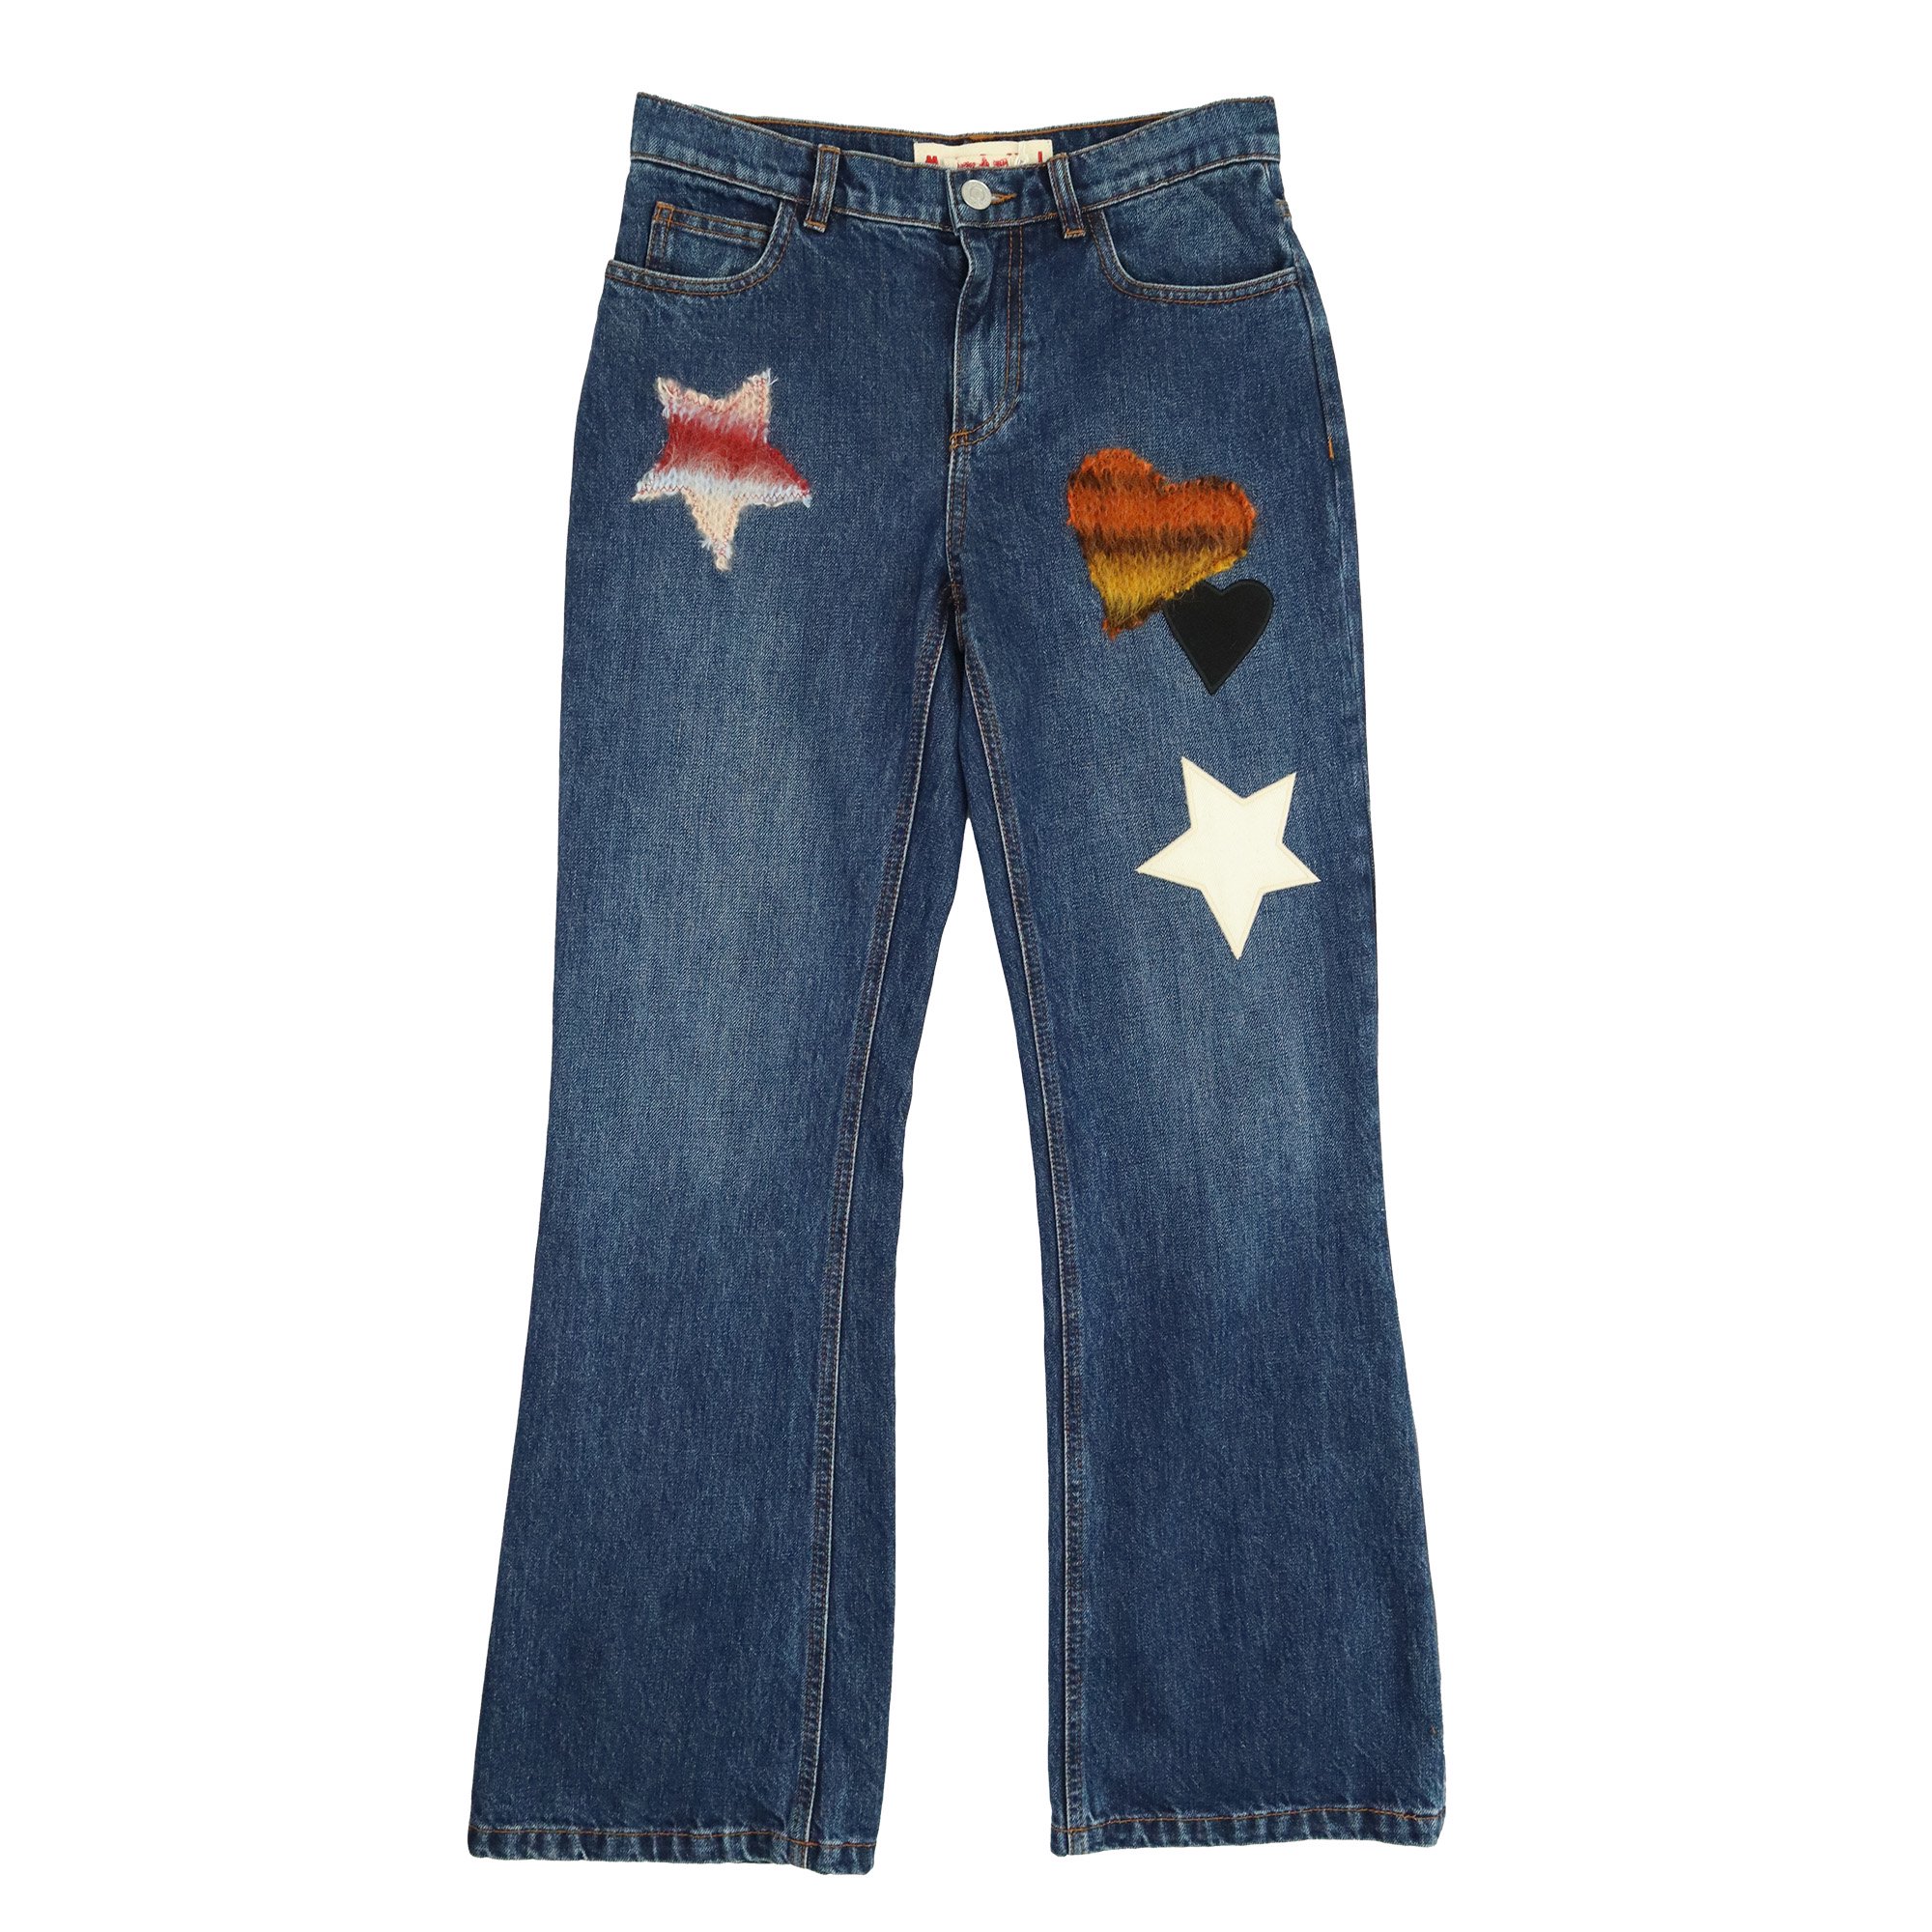 <img class='new_mark_img1' src='https://img.shop-pro.jp/img/new/icons21.gif' style='border:none;display:inline;margin:0px;padding:0px;width:auto;' />MARNI DENIM PANTS30%OFF